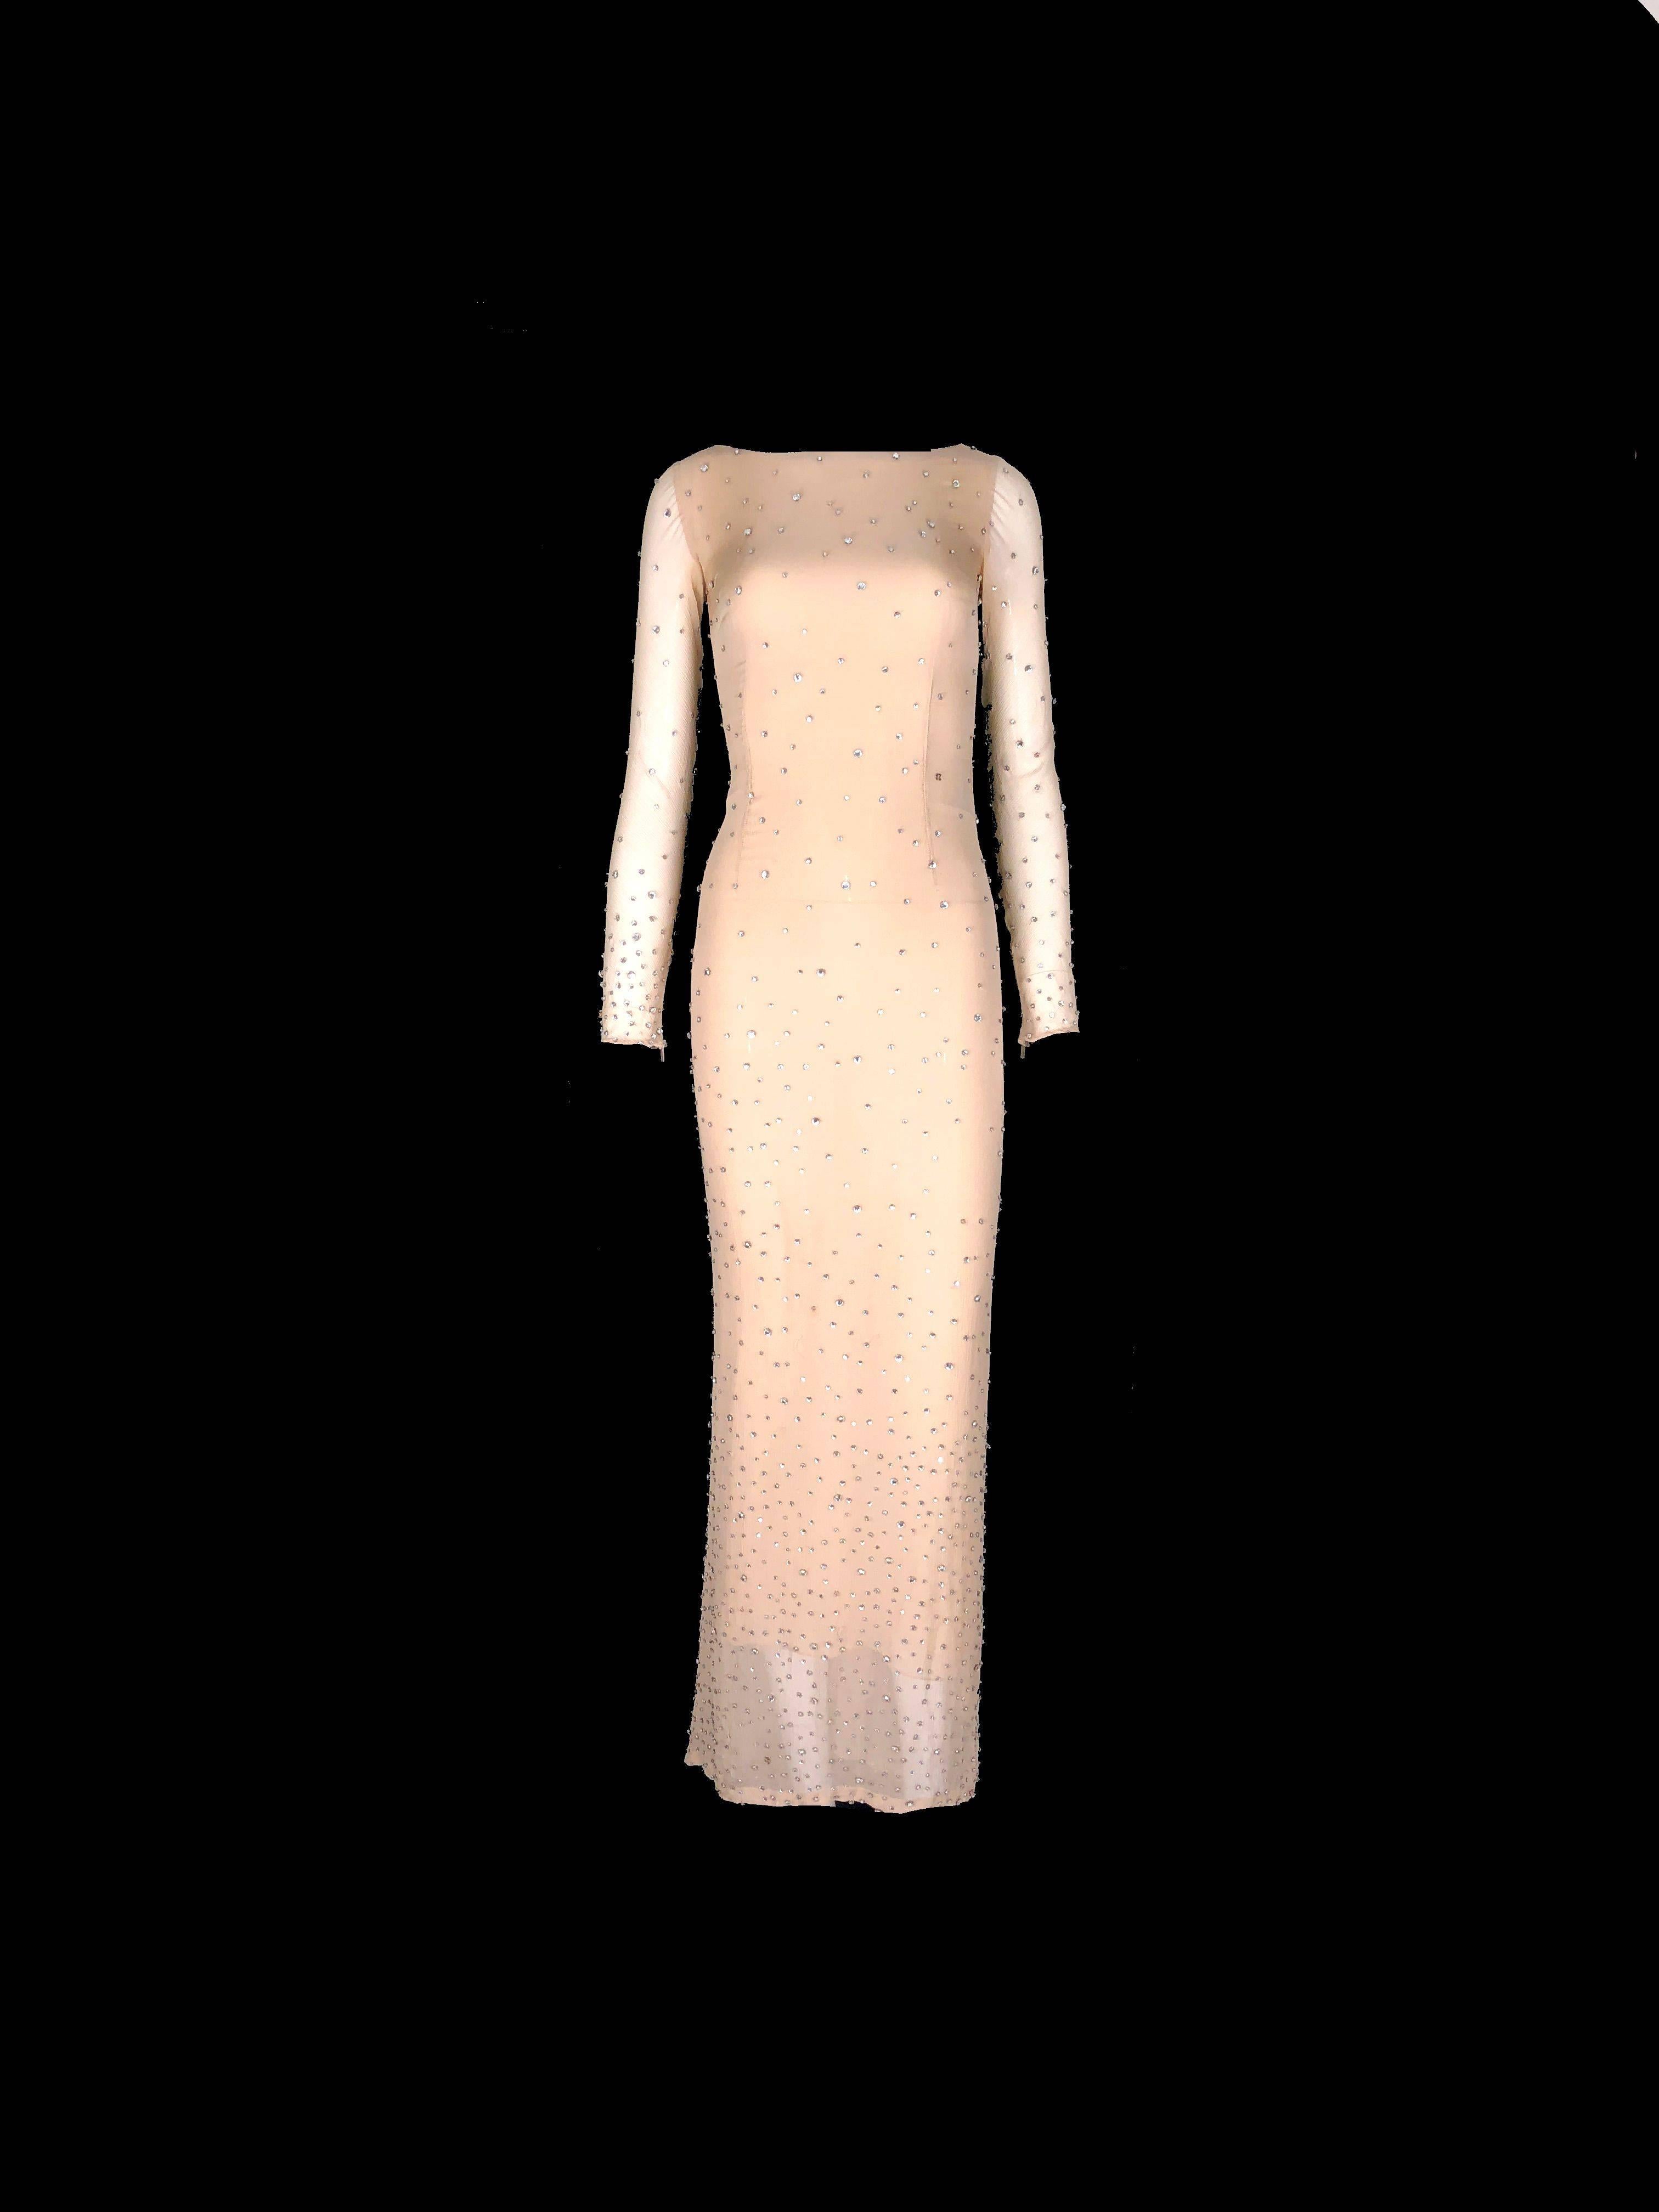 
Rare Collector's item

Beautiful nude evening silk evening gown
Embroidered with shiny Swarovski crytals

Designed by Tom Ford for Gucci's 2000 Millenium Collection
A rare piece not made for the RTW collections in stores

Tom Ford designed a